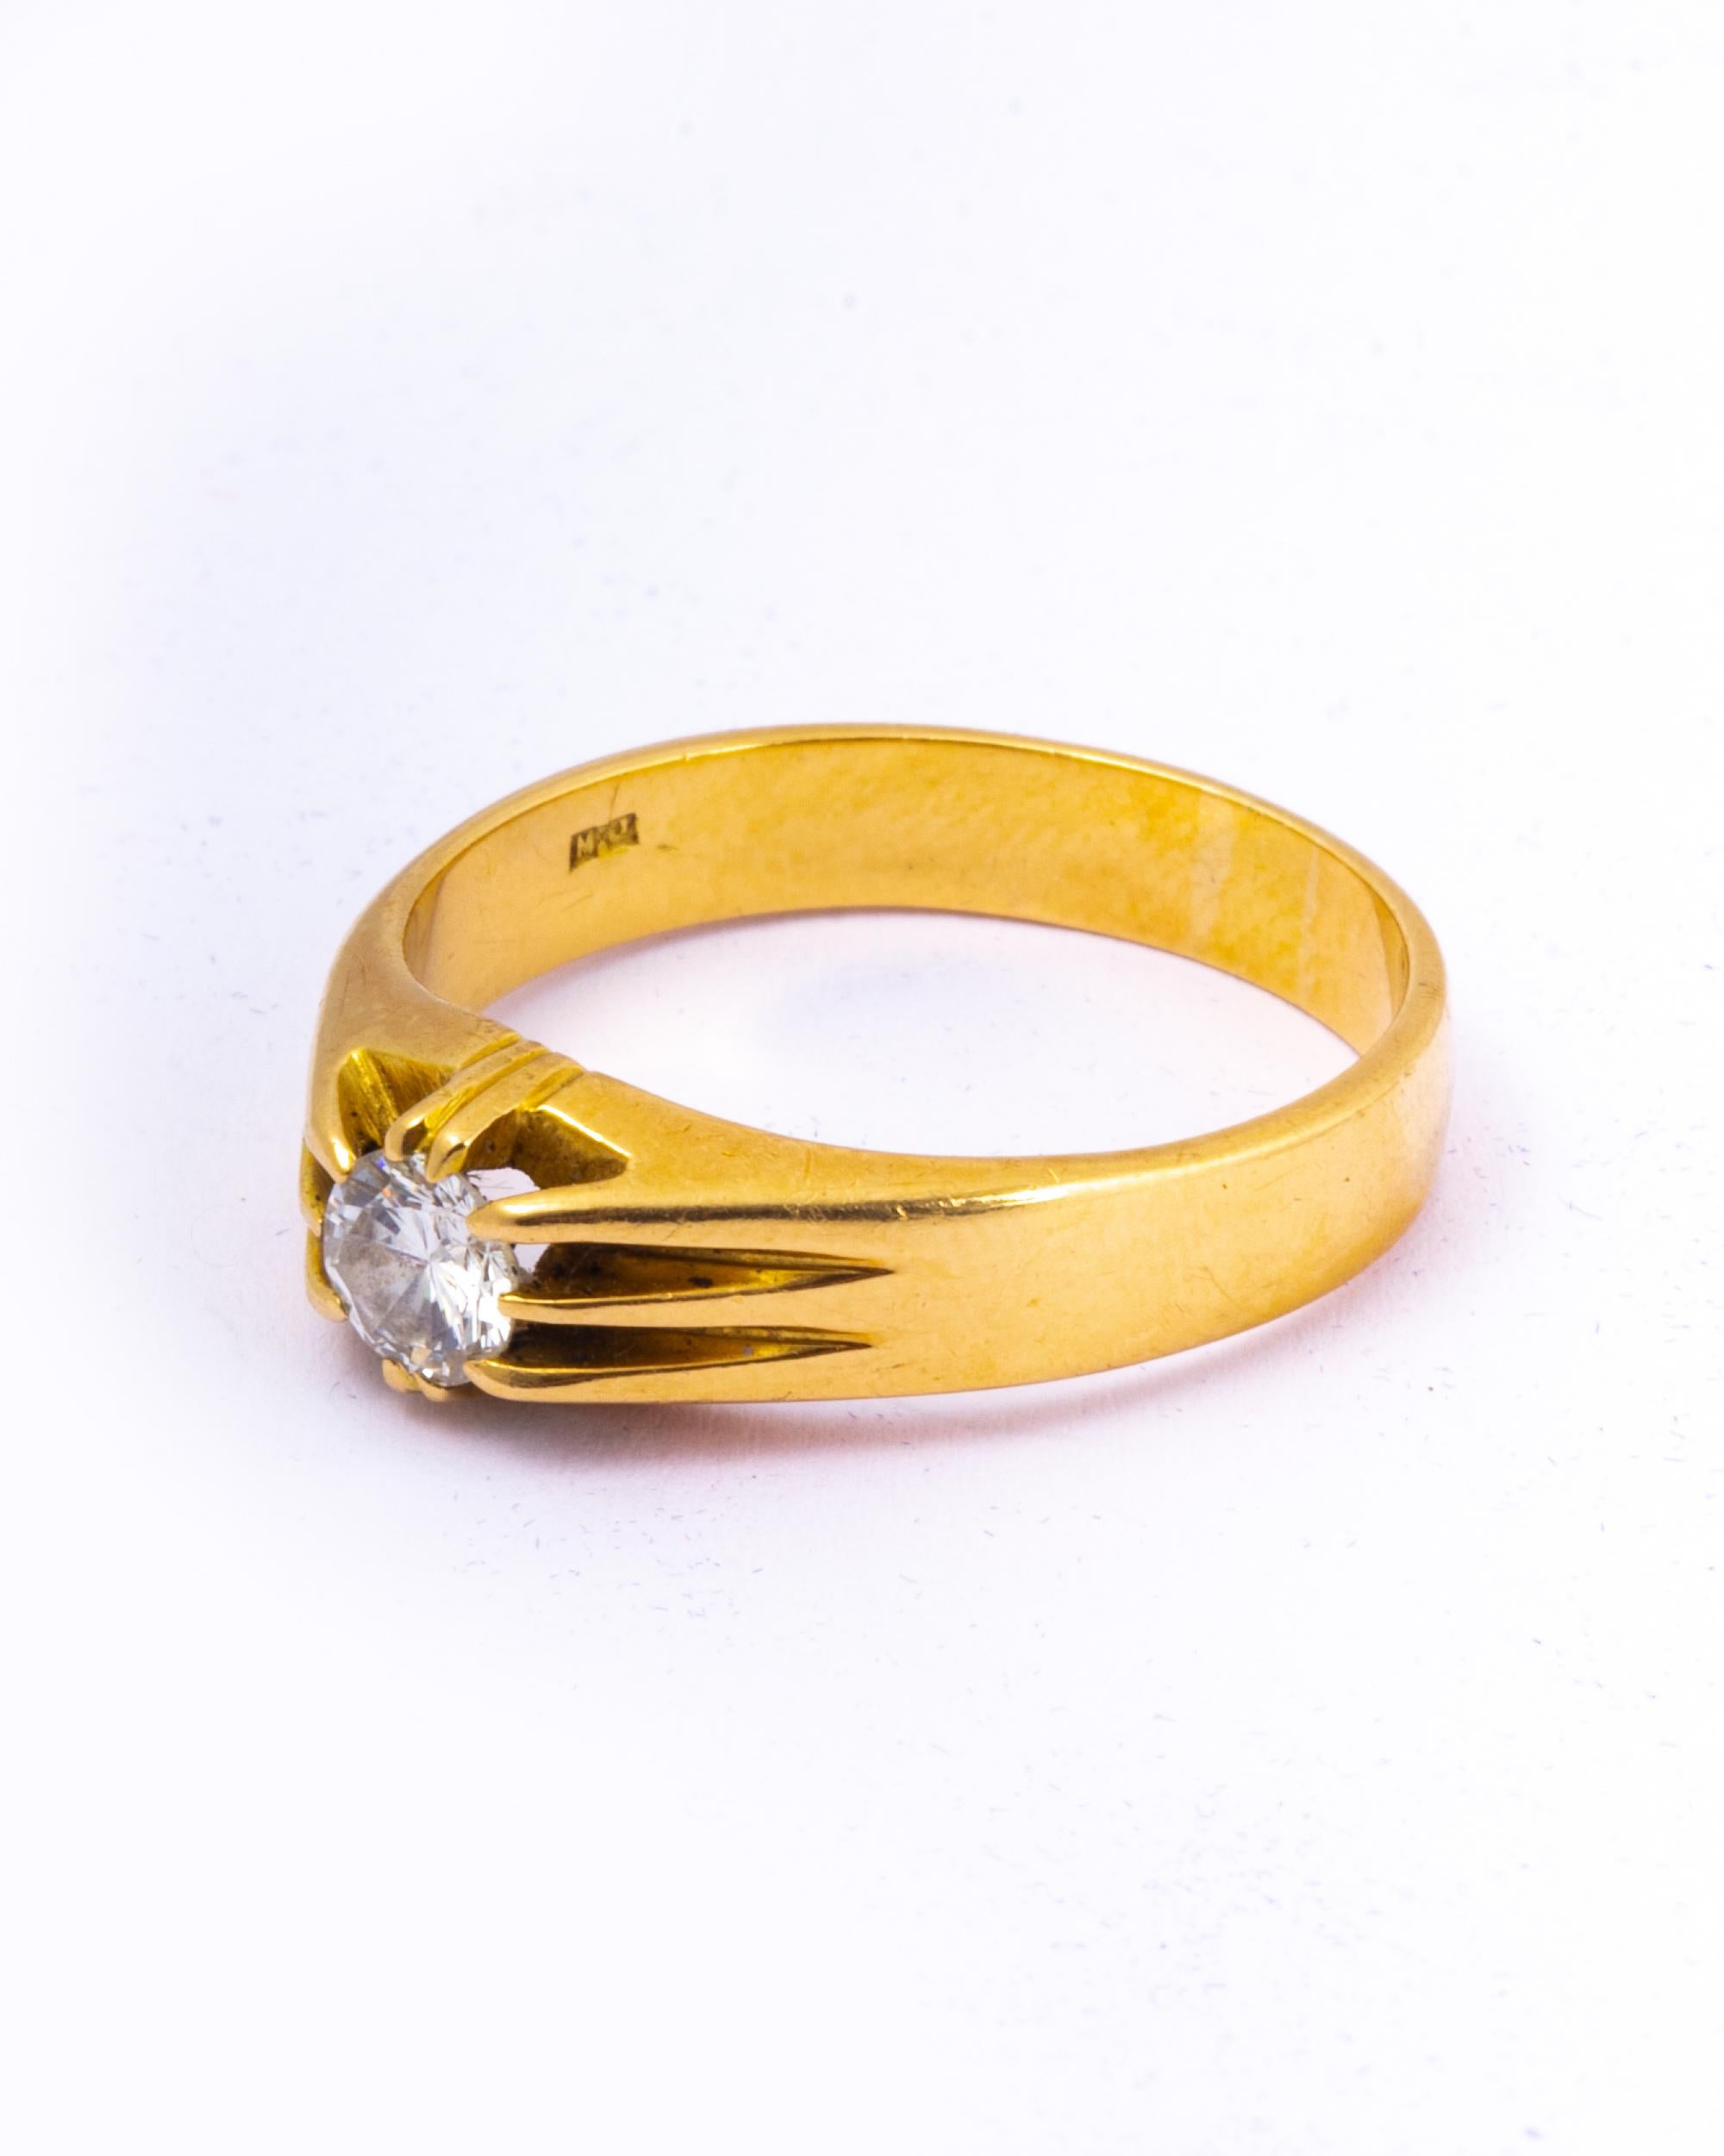 The brilliant cut diamond set within this gorgeous 18ct gold band is so sparkly and bright. It measures 50pts so is a great size! 

Ring Size: T 1/4 or 9 3/4 
Band Width: 6mm
Height From Finger: 4mm

Weight: 6.5g